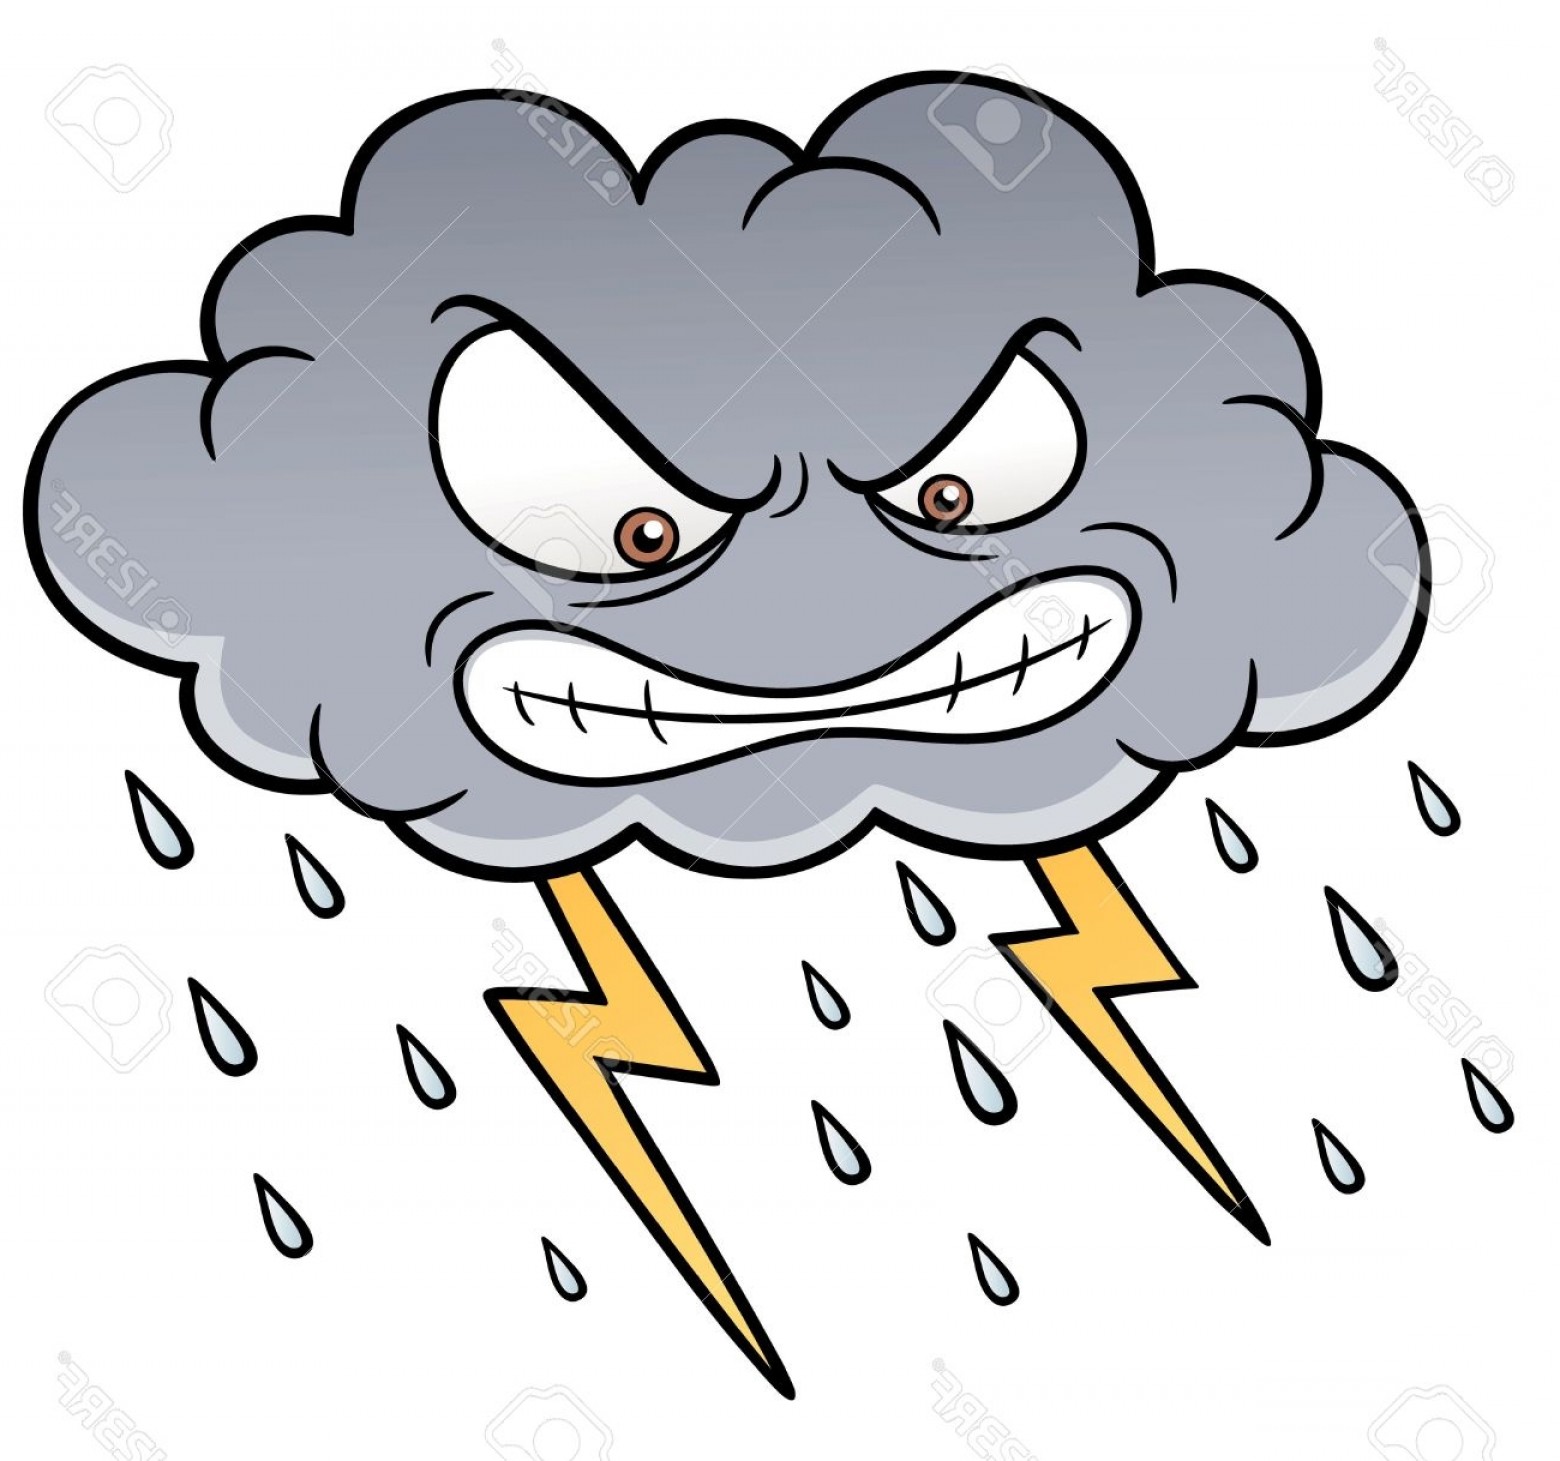 Thunderstorm cliparts free download. Windy clipart stormy day